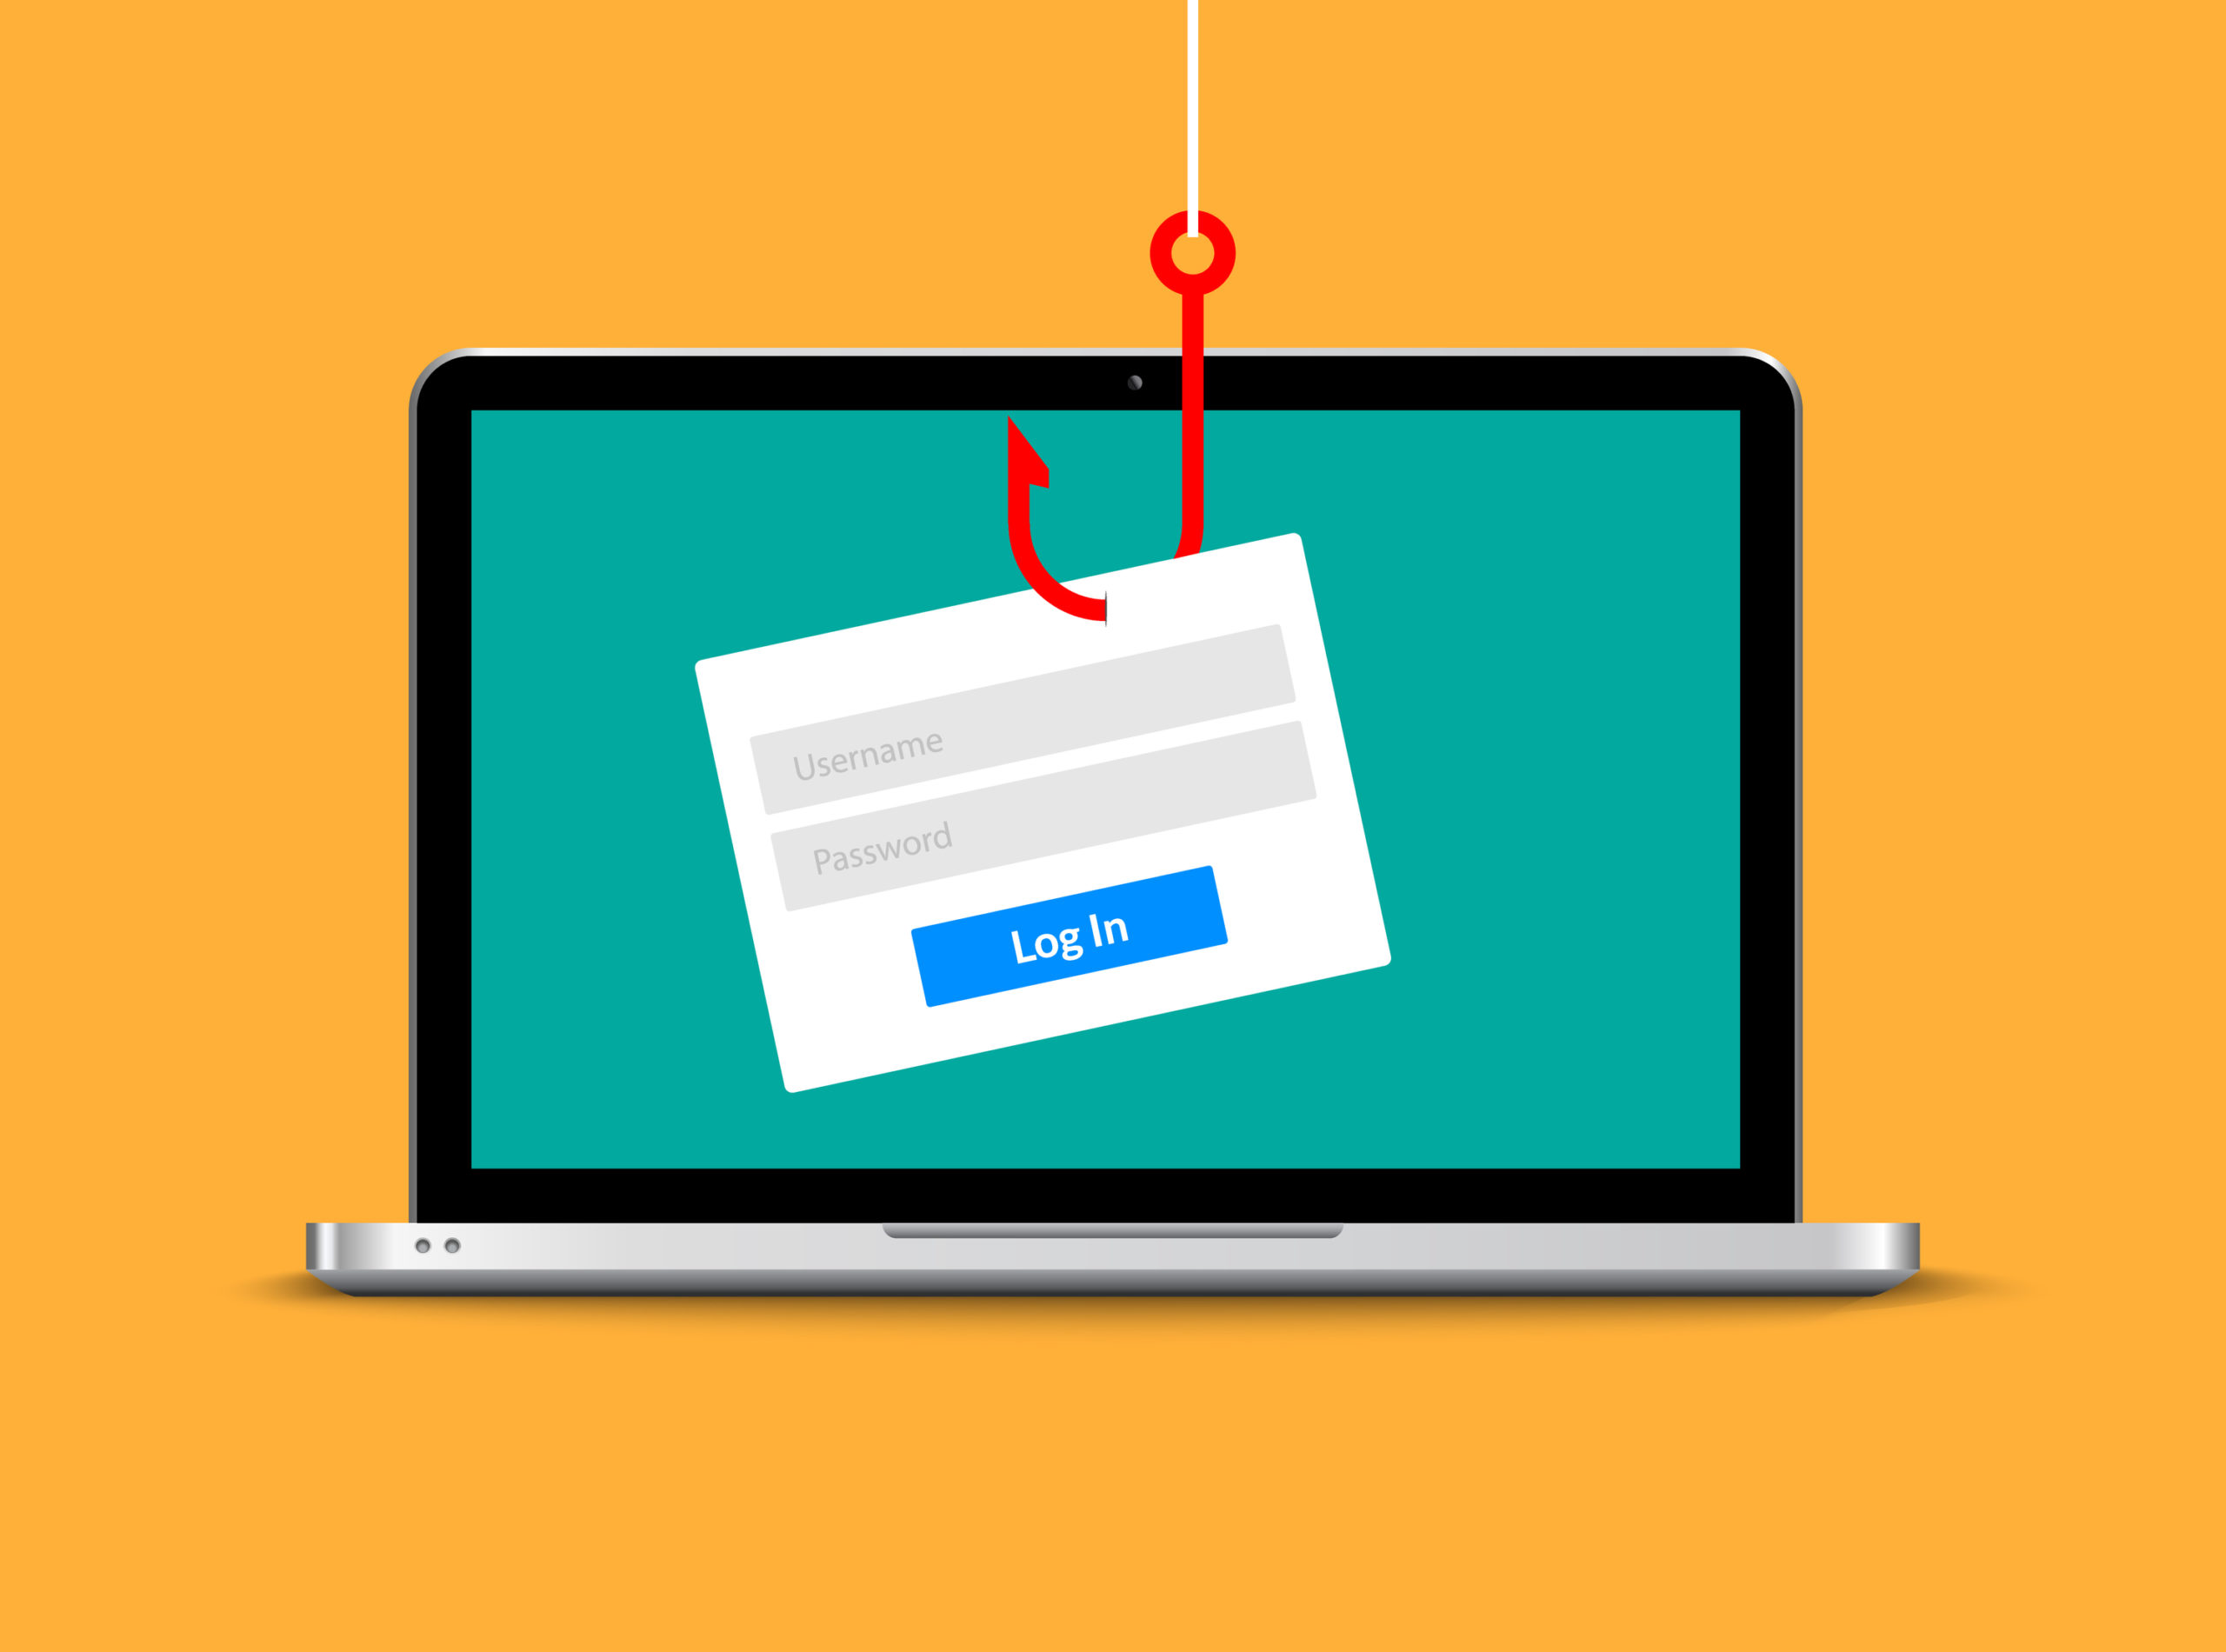 Are You Making This Fatal Mistake That Can Increase Phishing Risk?